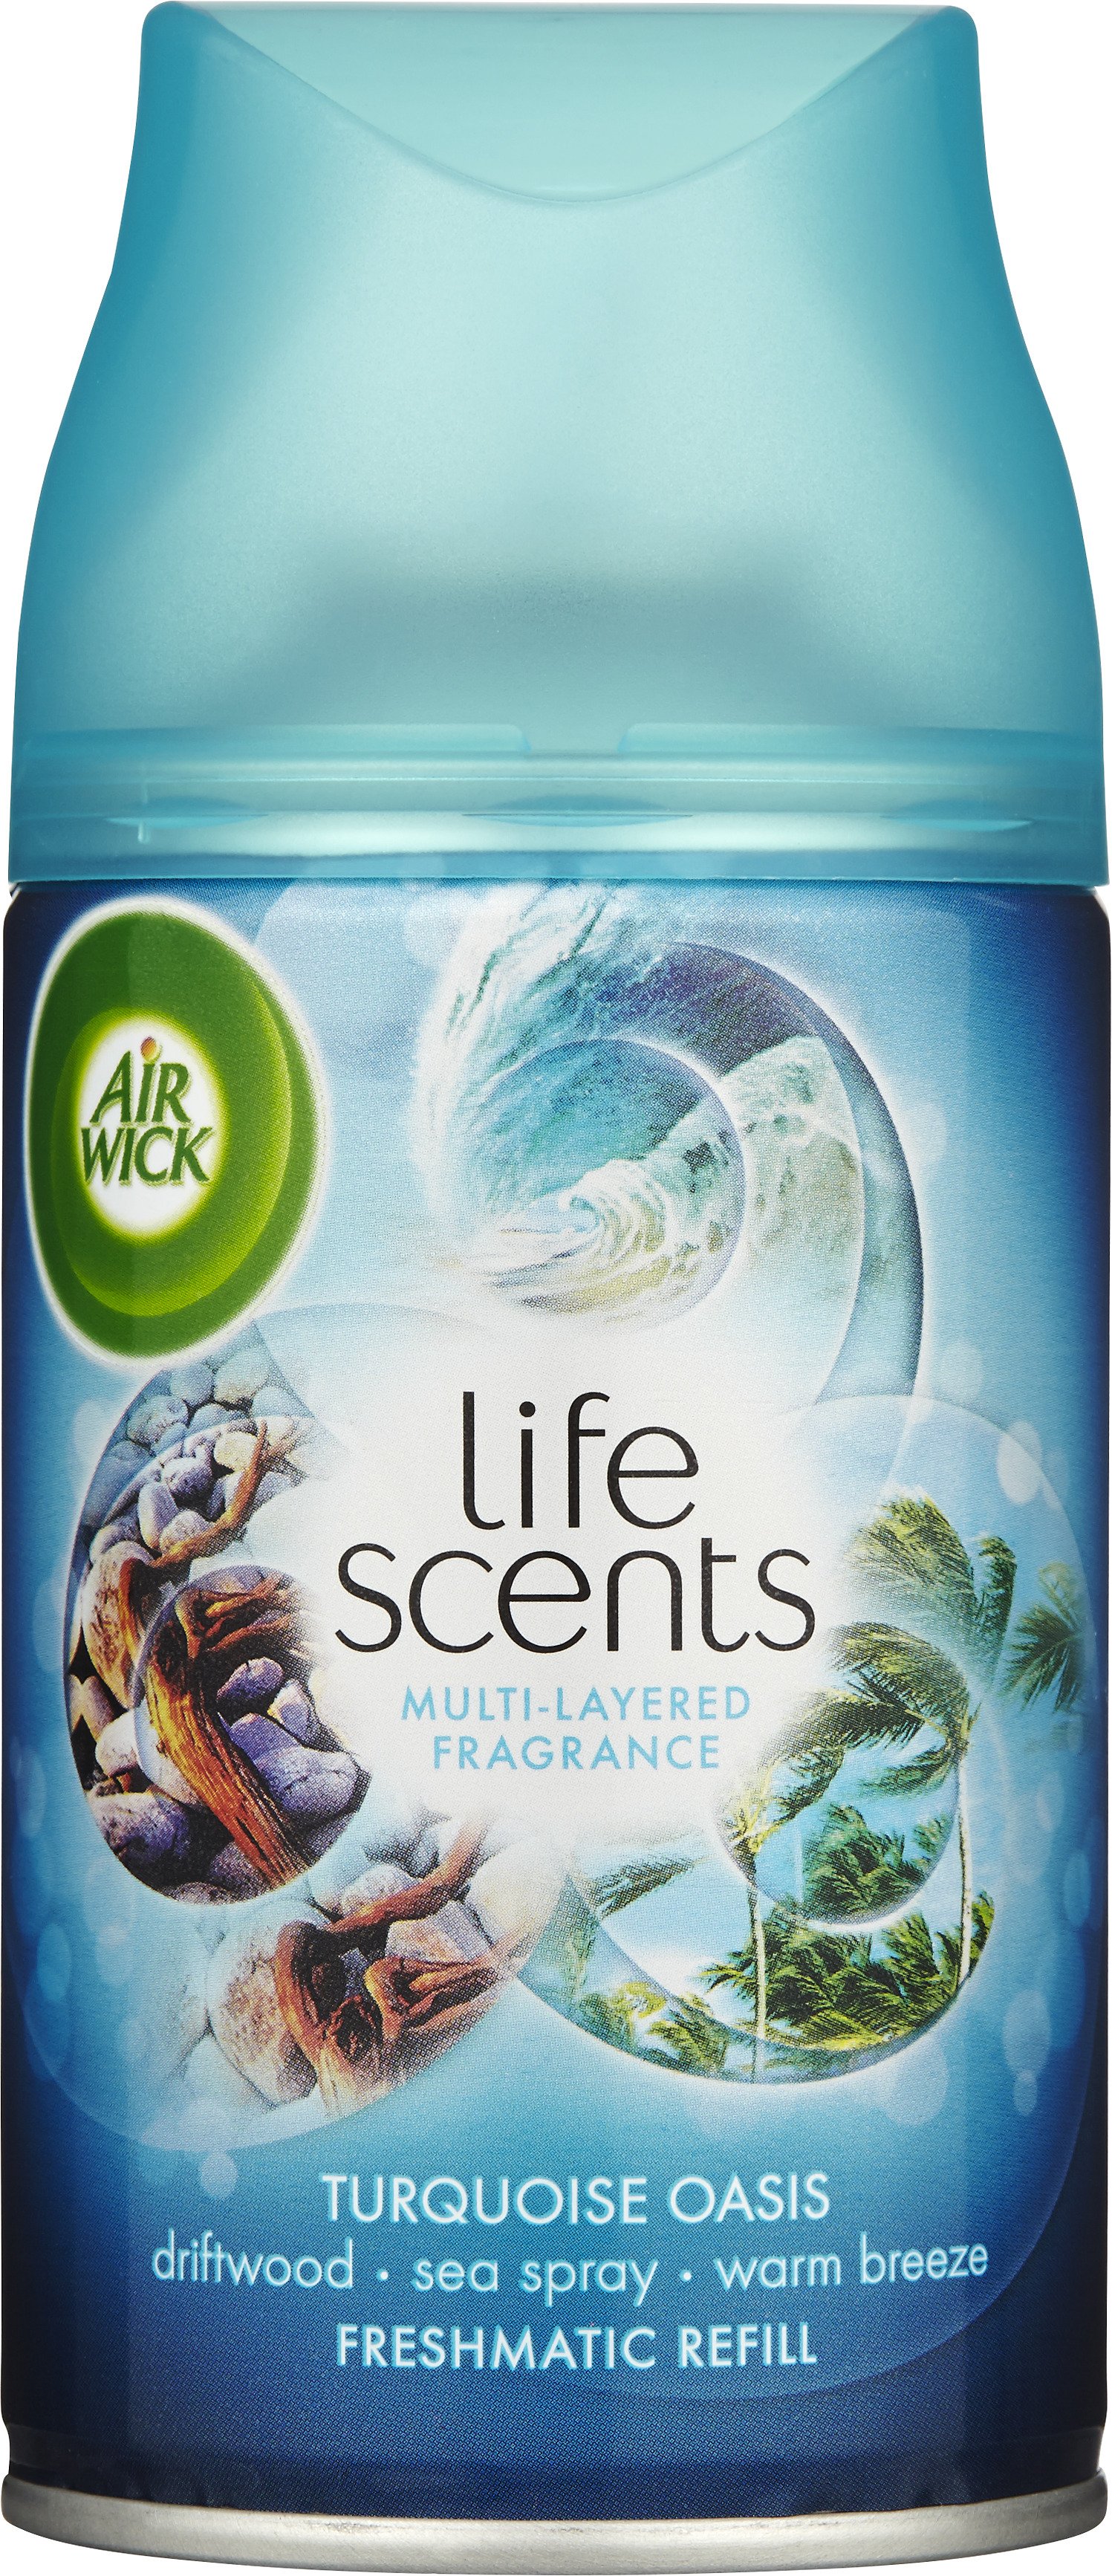 Air Wick Life Scents Turquoise Oasis Luftfilter Refill 250 ml